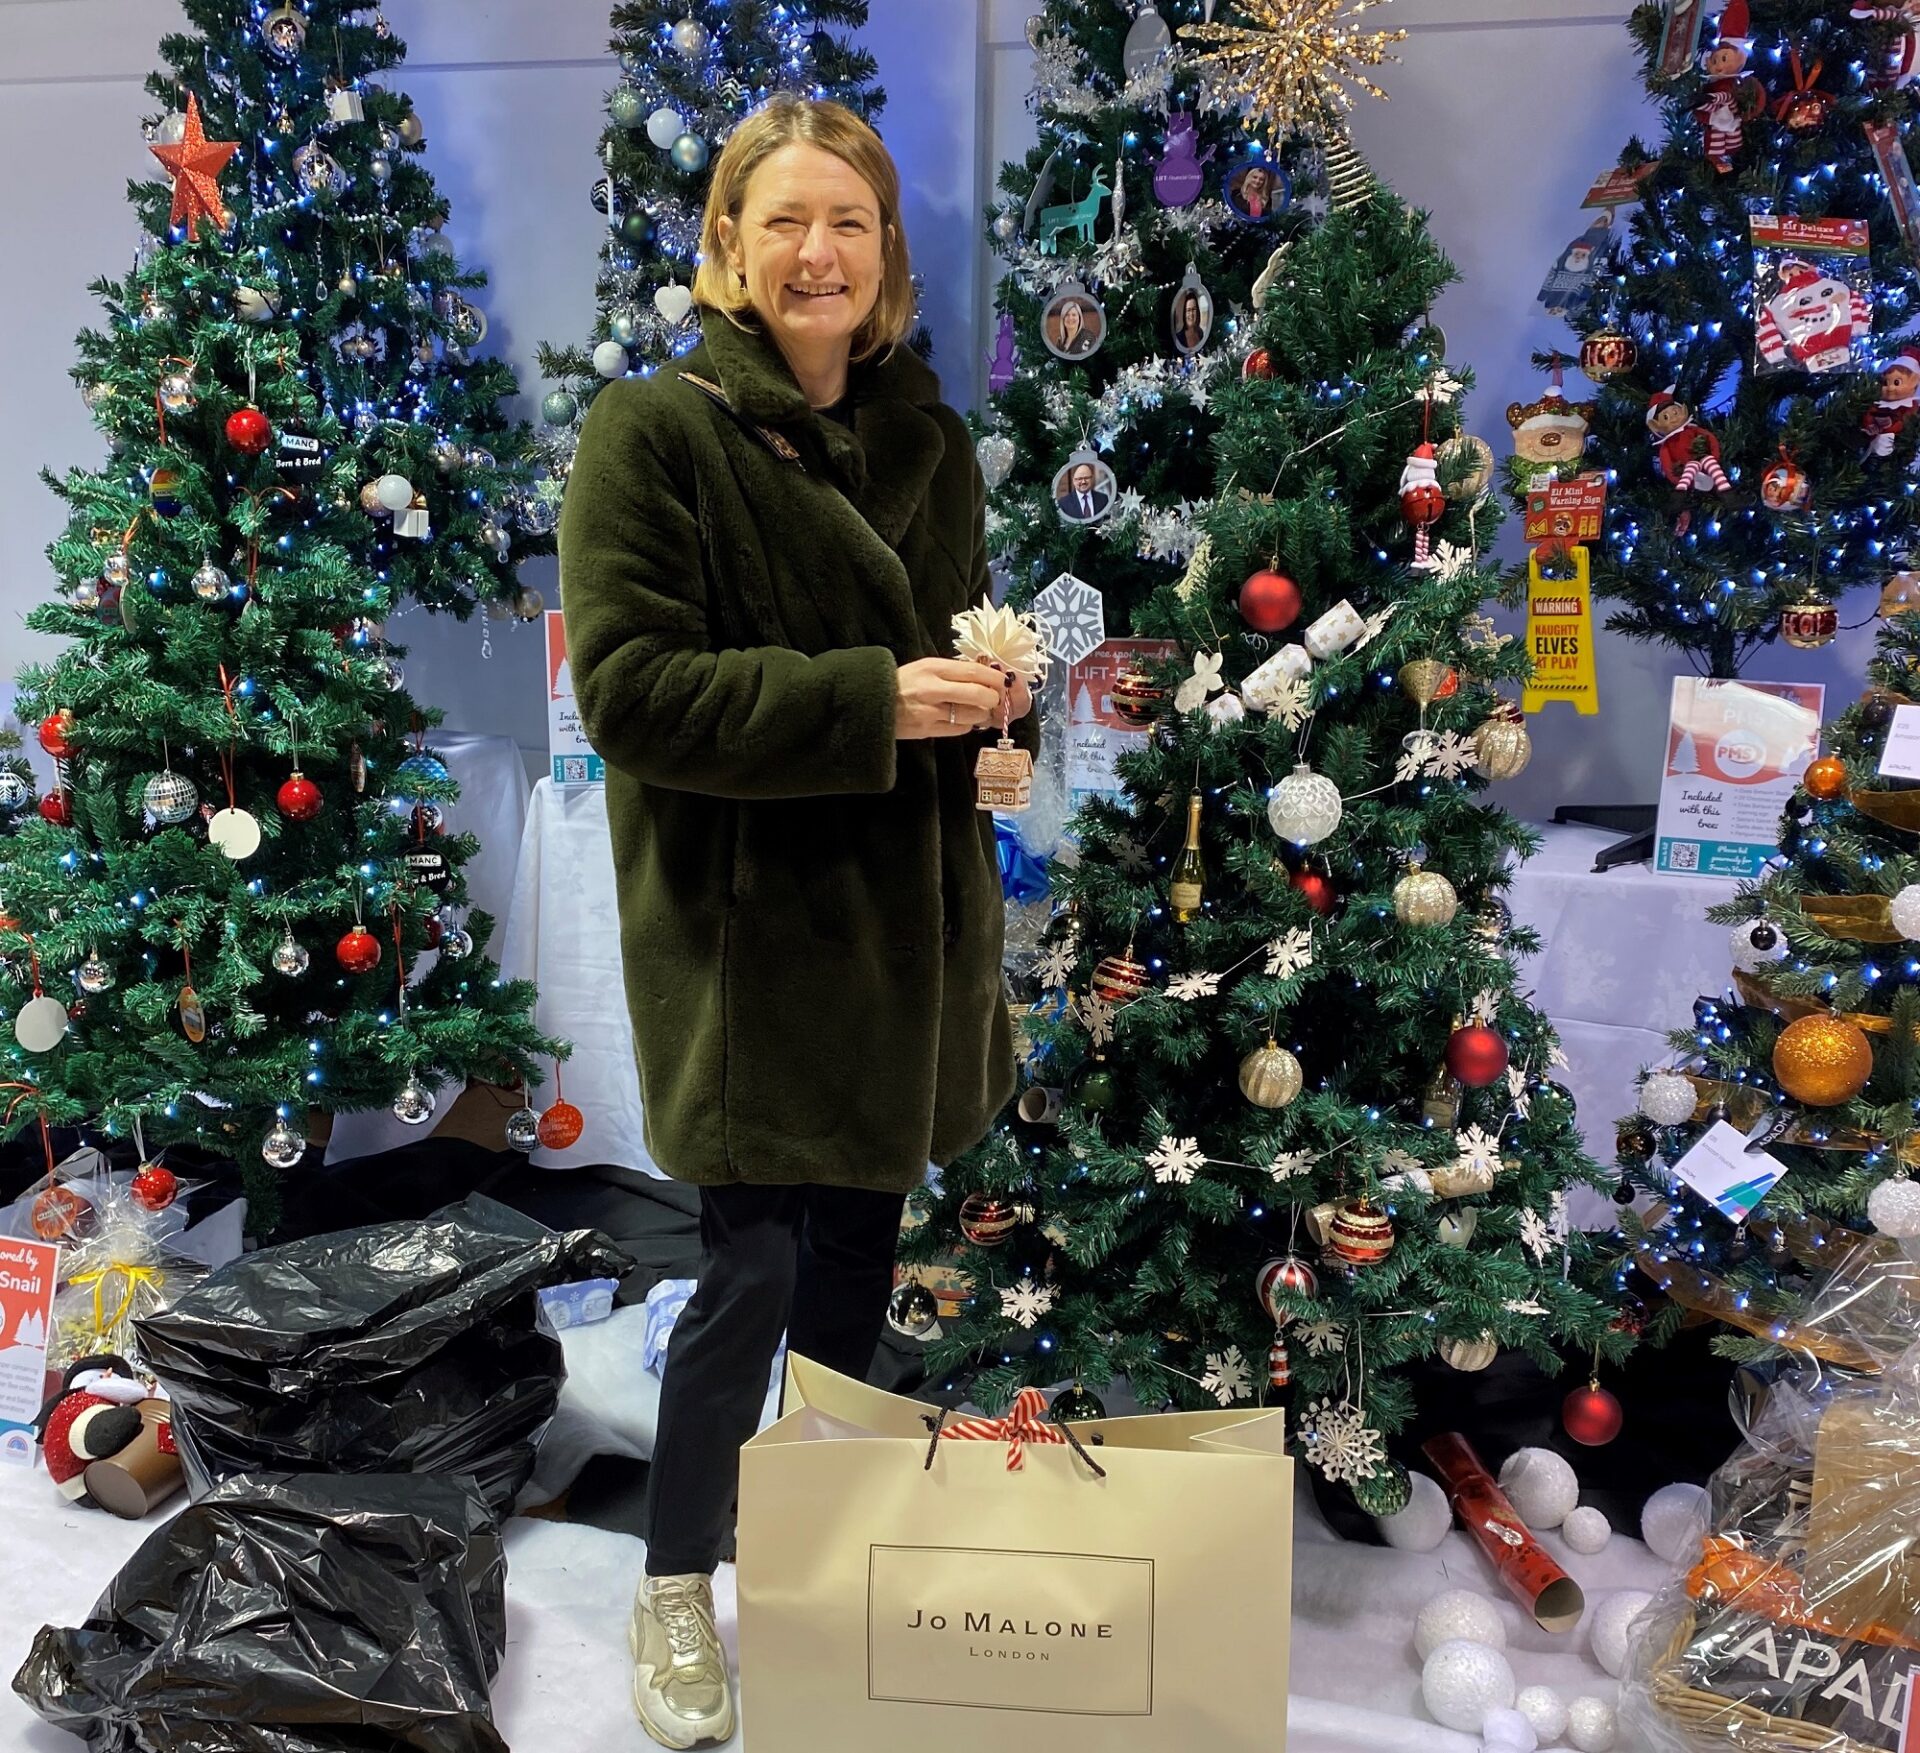 Woman wearing black coat holding a bauble stood in front of a Christmas tree with a large bag with the words Jo Malone on it